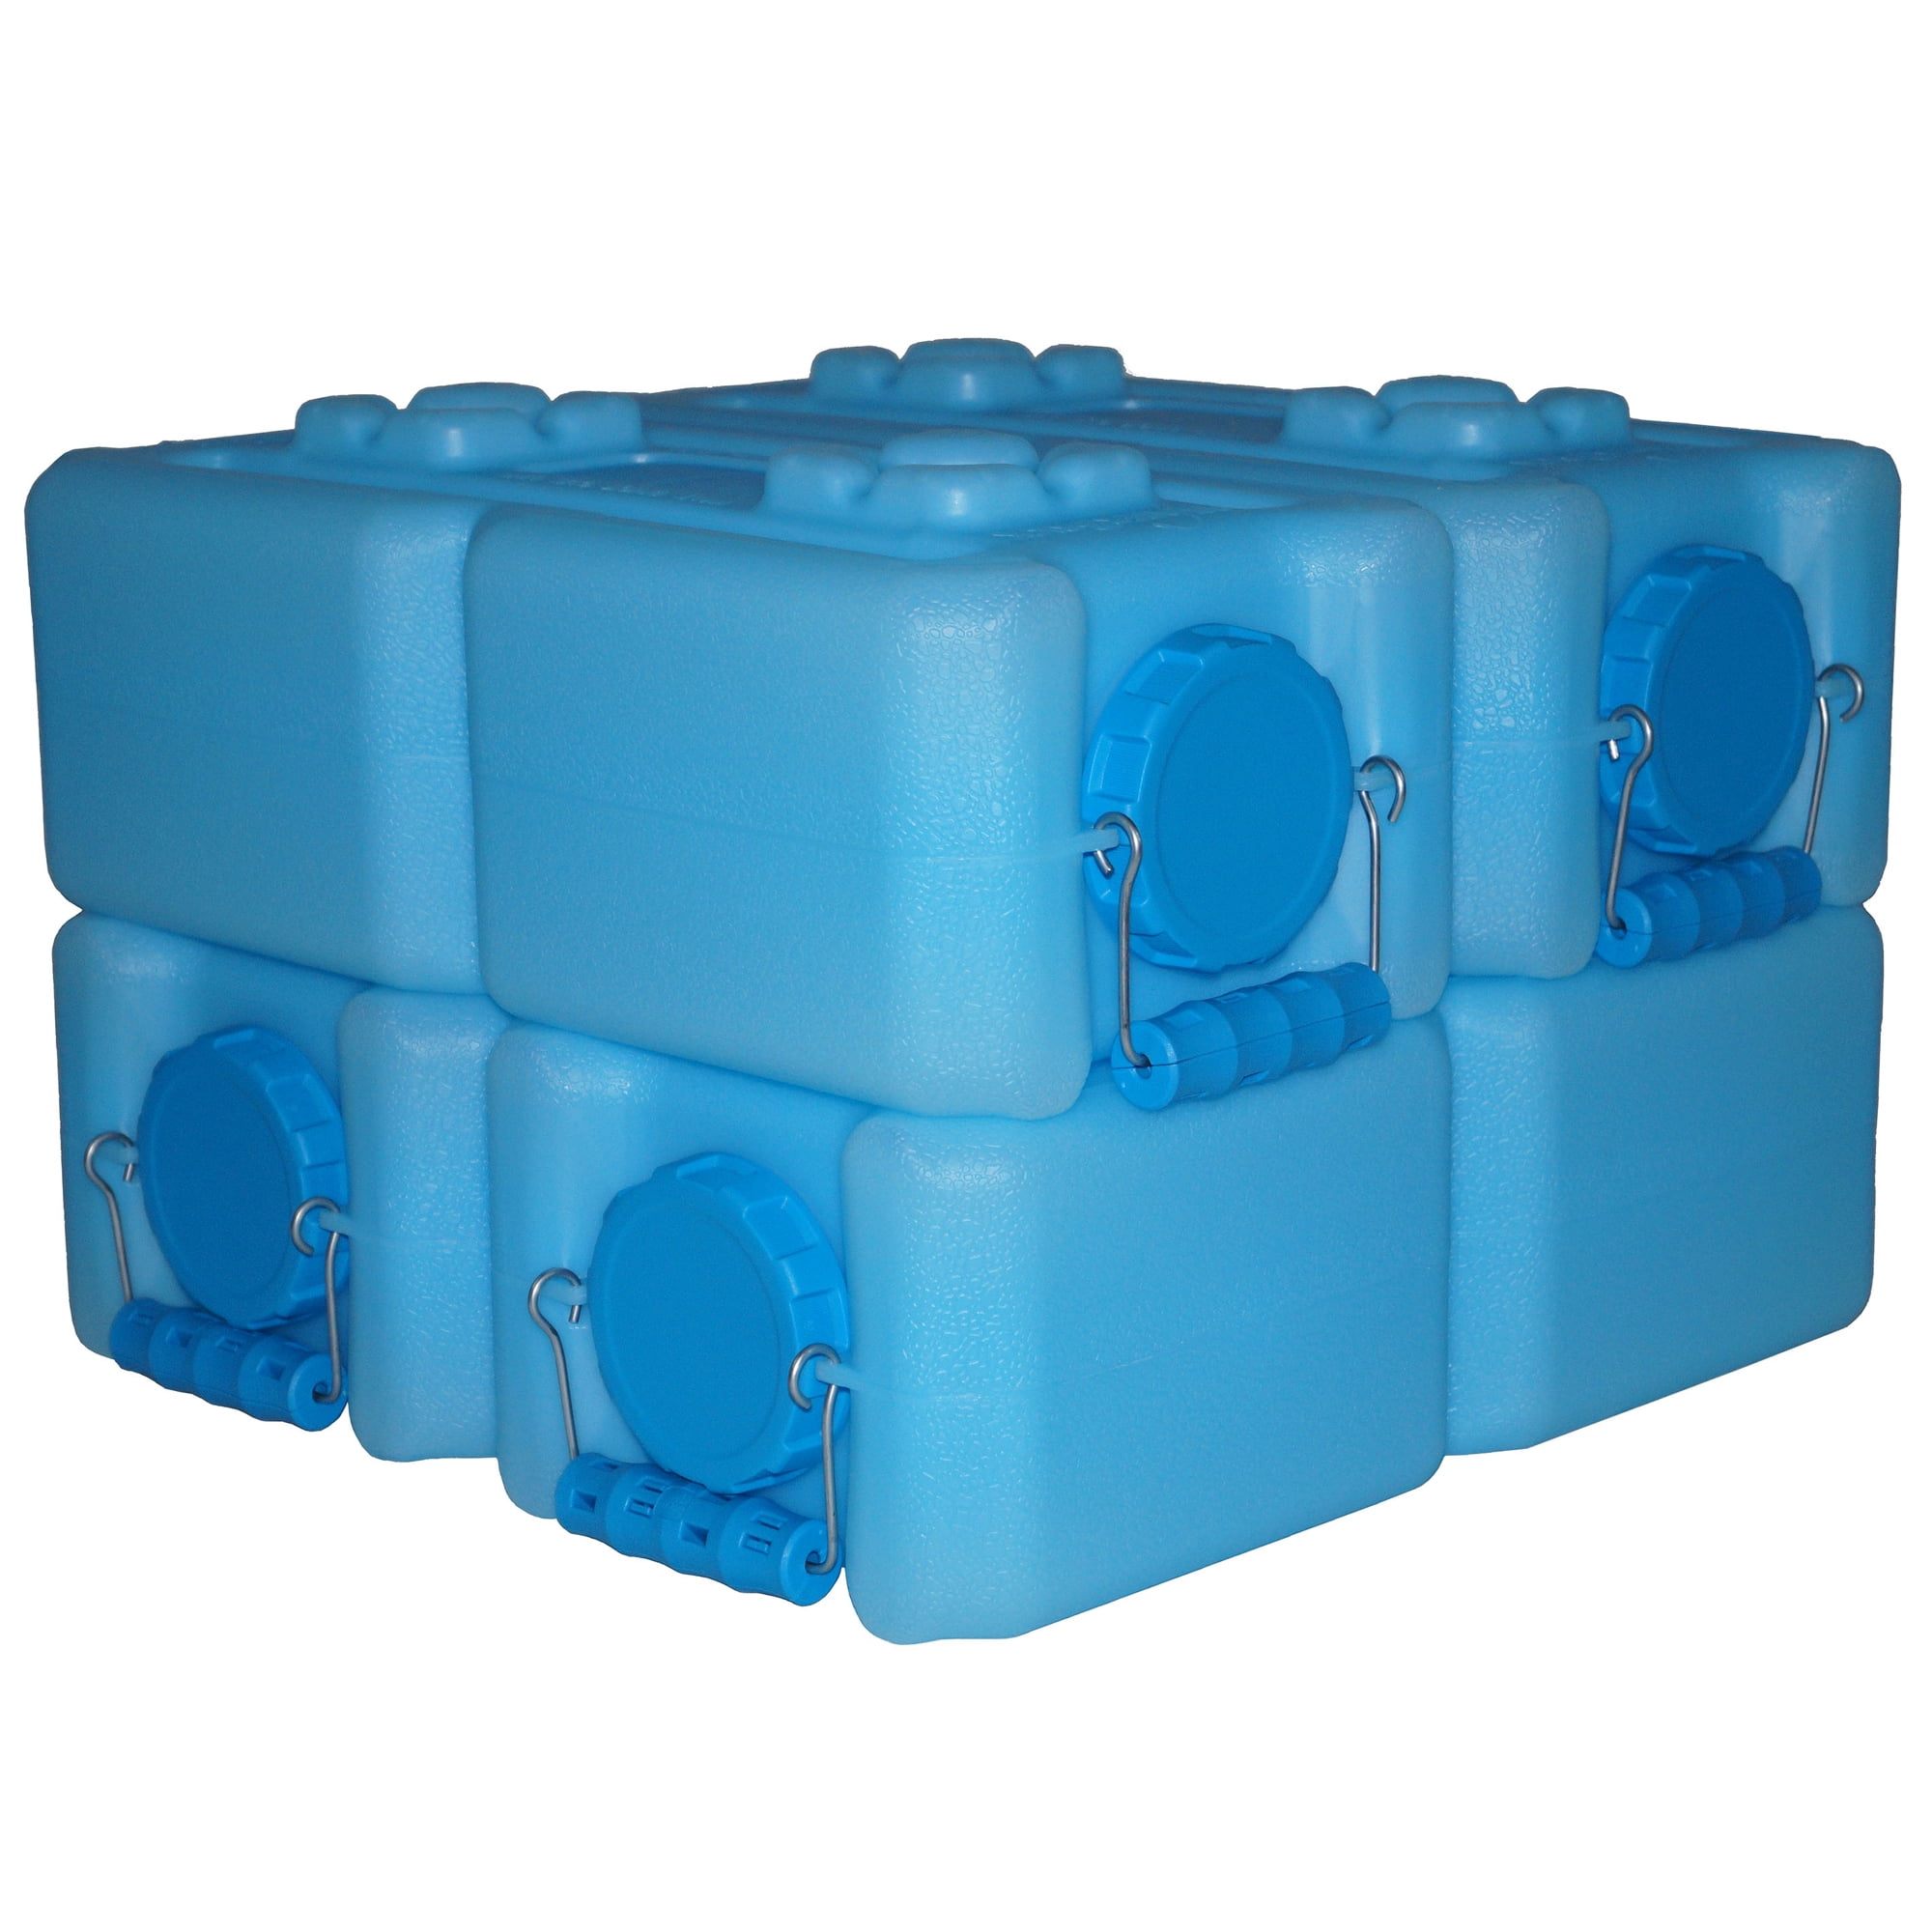 WaterBrick Standard 3.5 Gal. Water Storage Container in Blue (4-Piece)  1833-0001-4 - The Home Depot